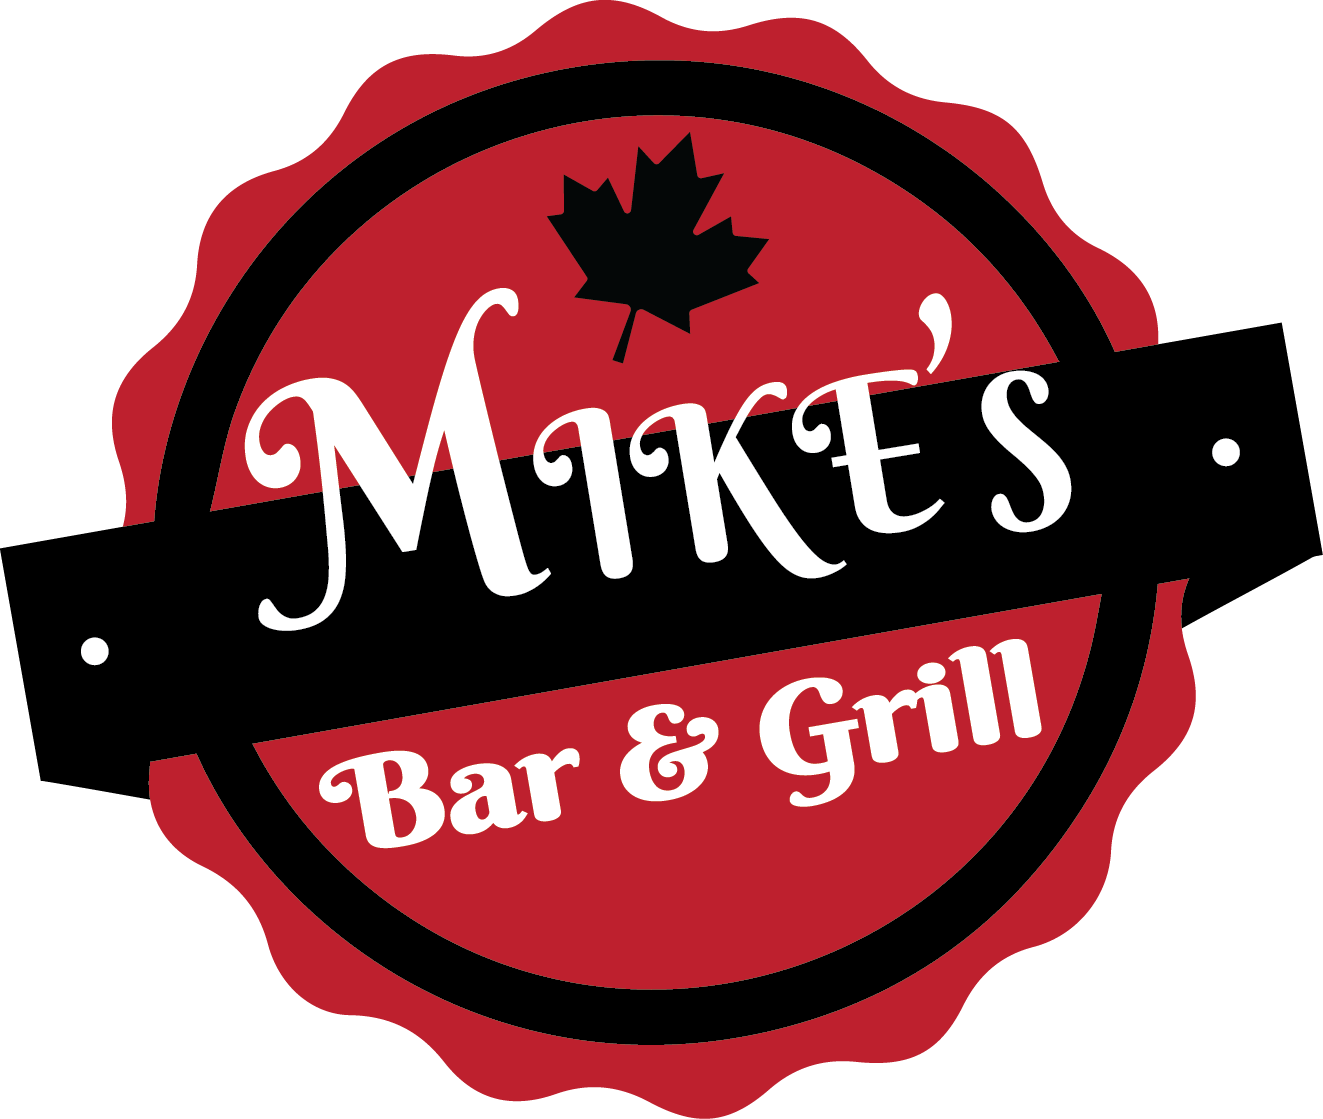 Mike's Bar & Grill